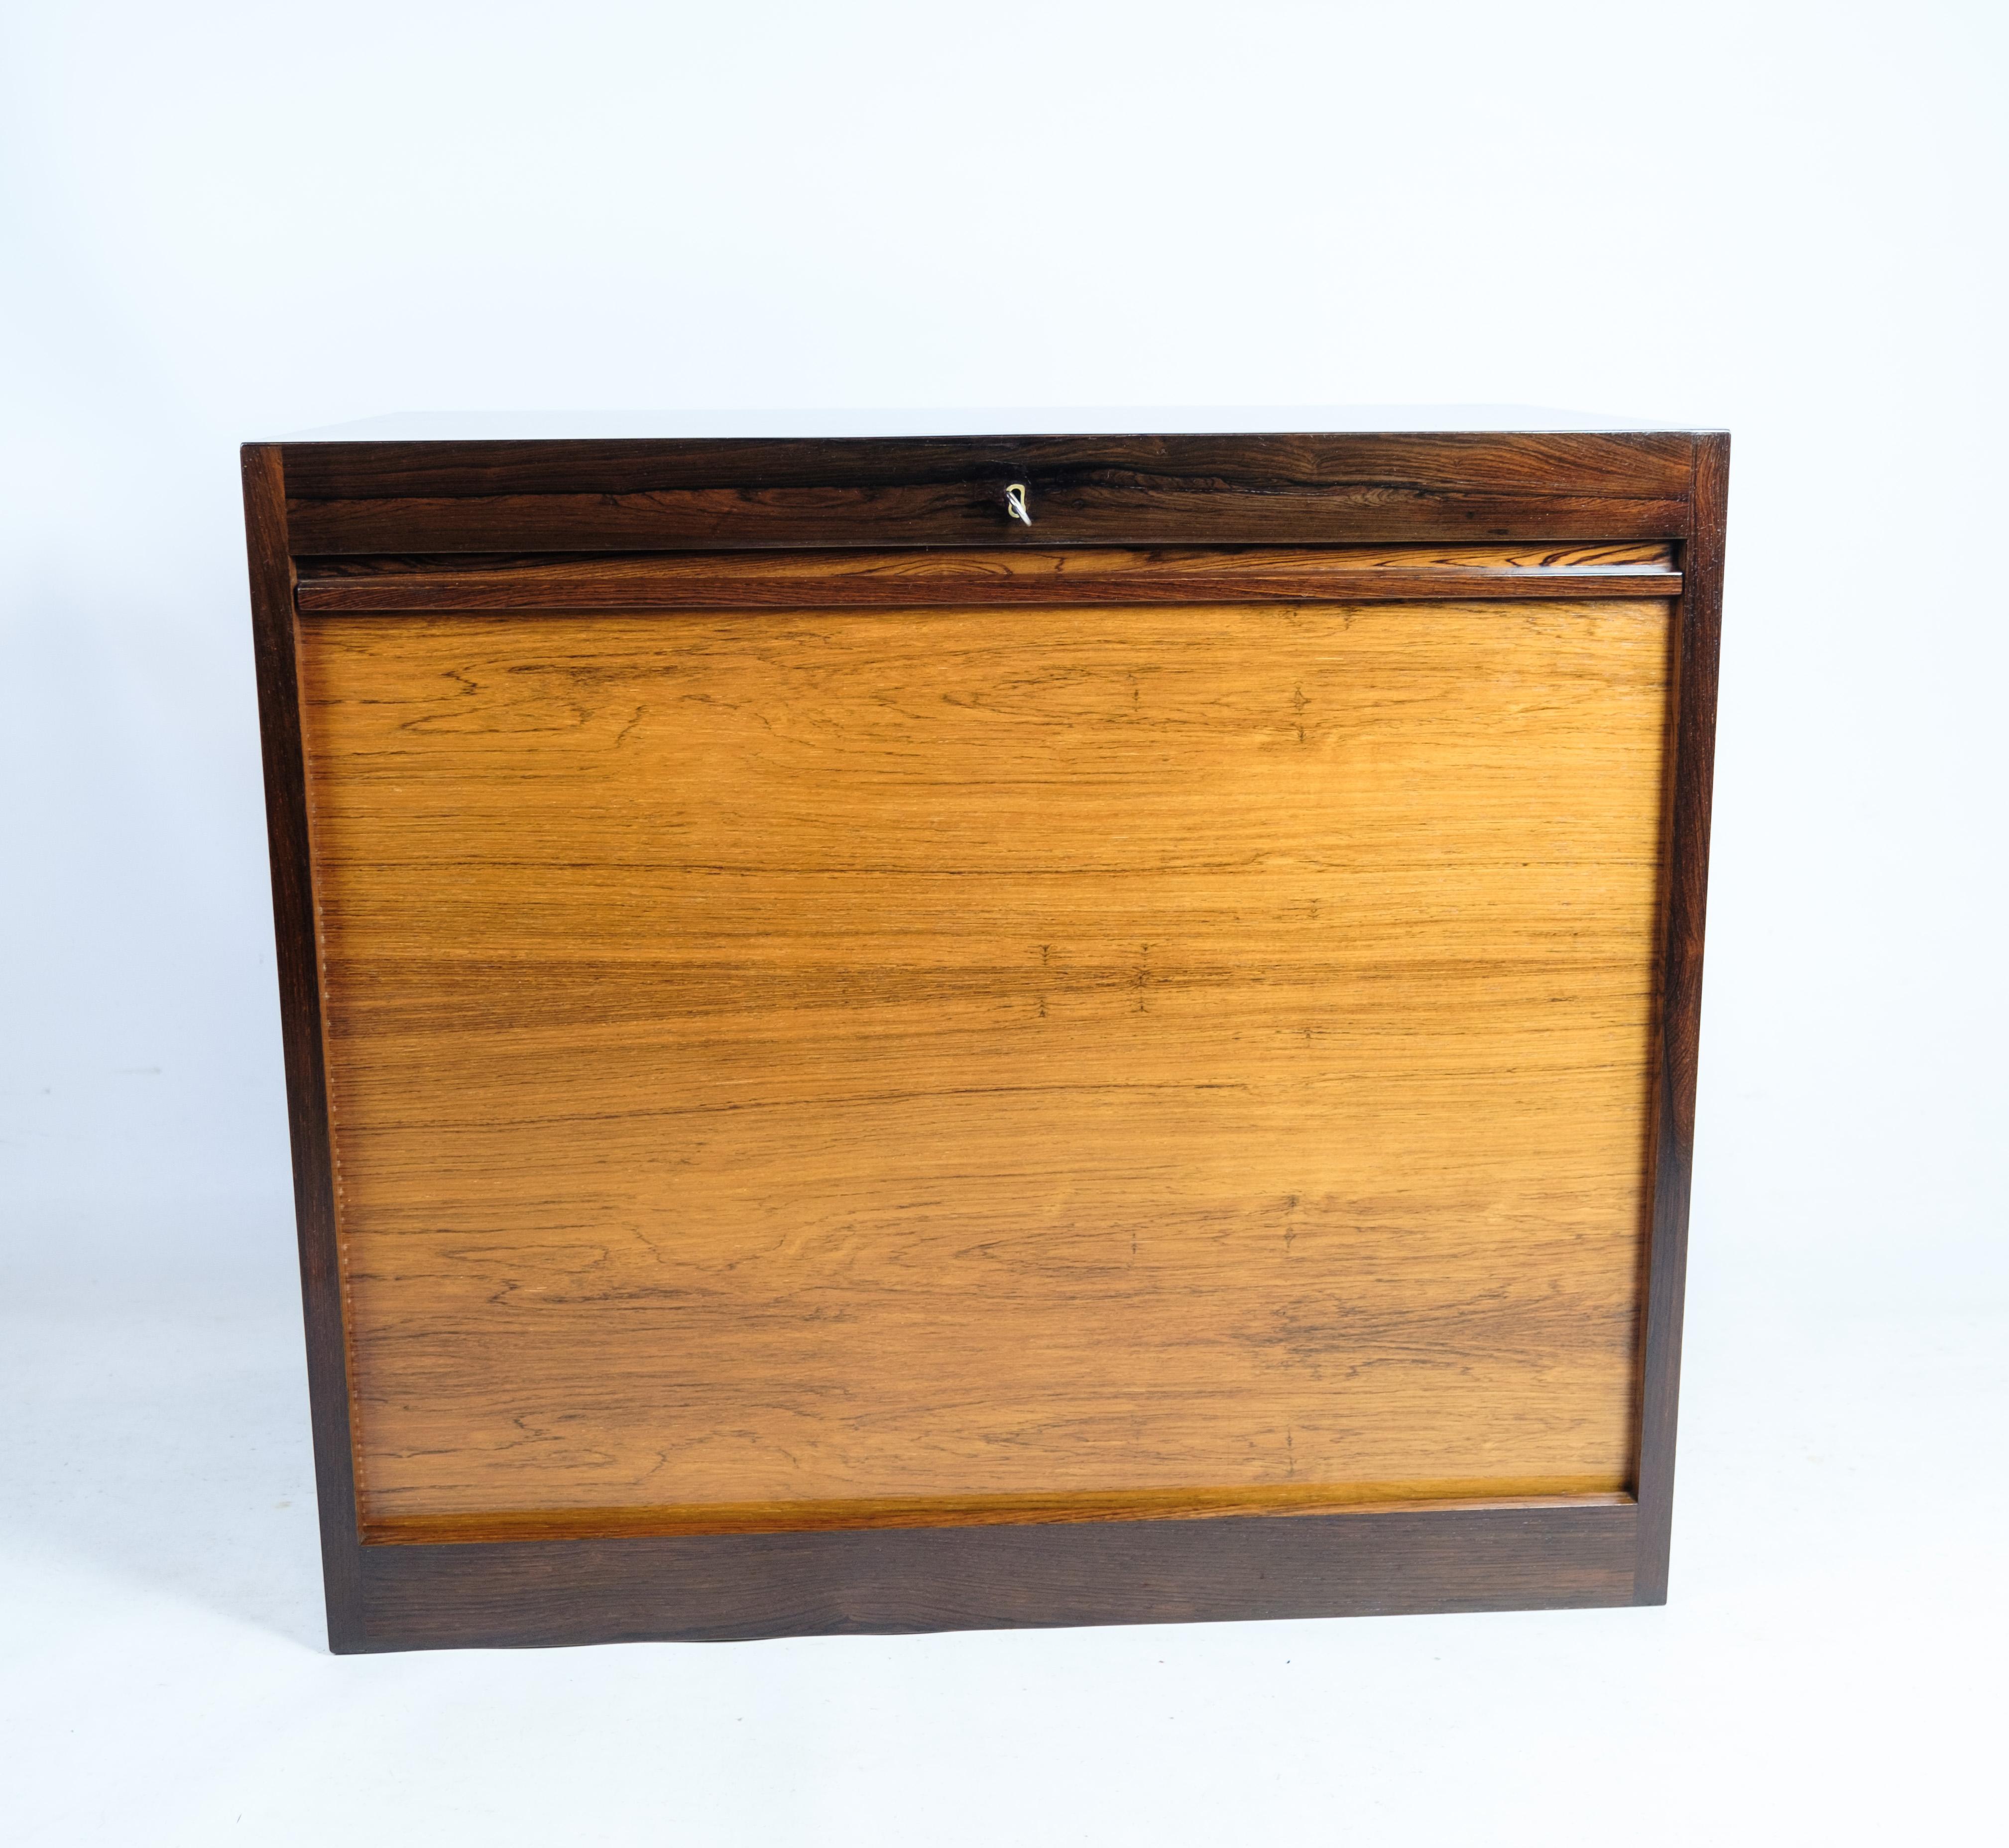 Cabinet with Pull-Up Door in Rosewood of Danish Design from the 1960s For Sale 1